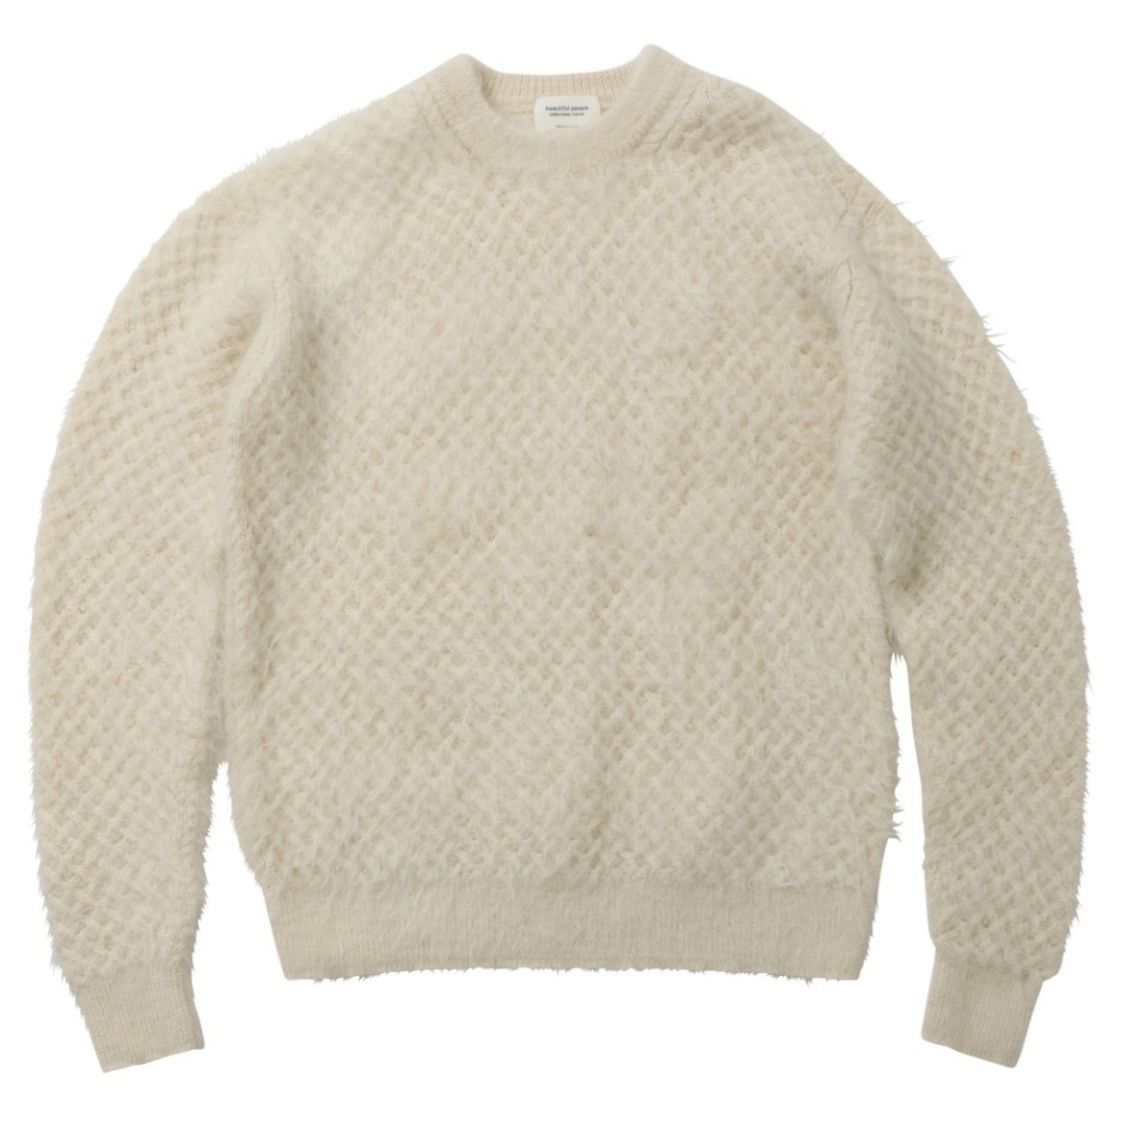 Beautiful People - Sweater crew neck kid mohair brushed